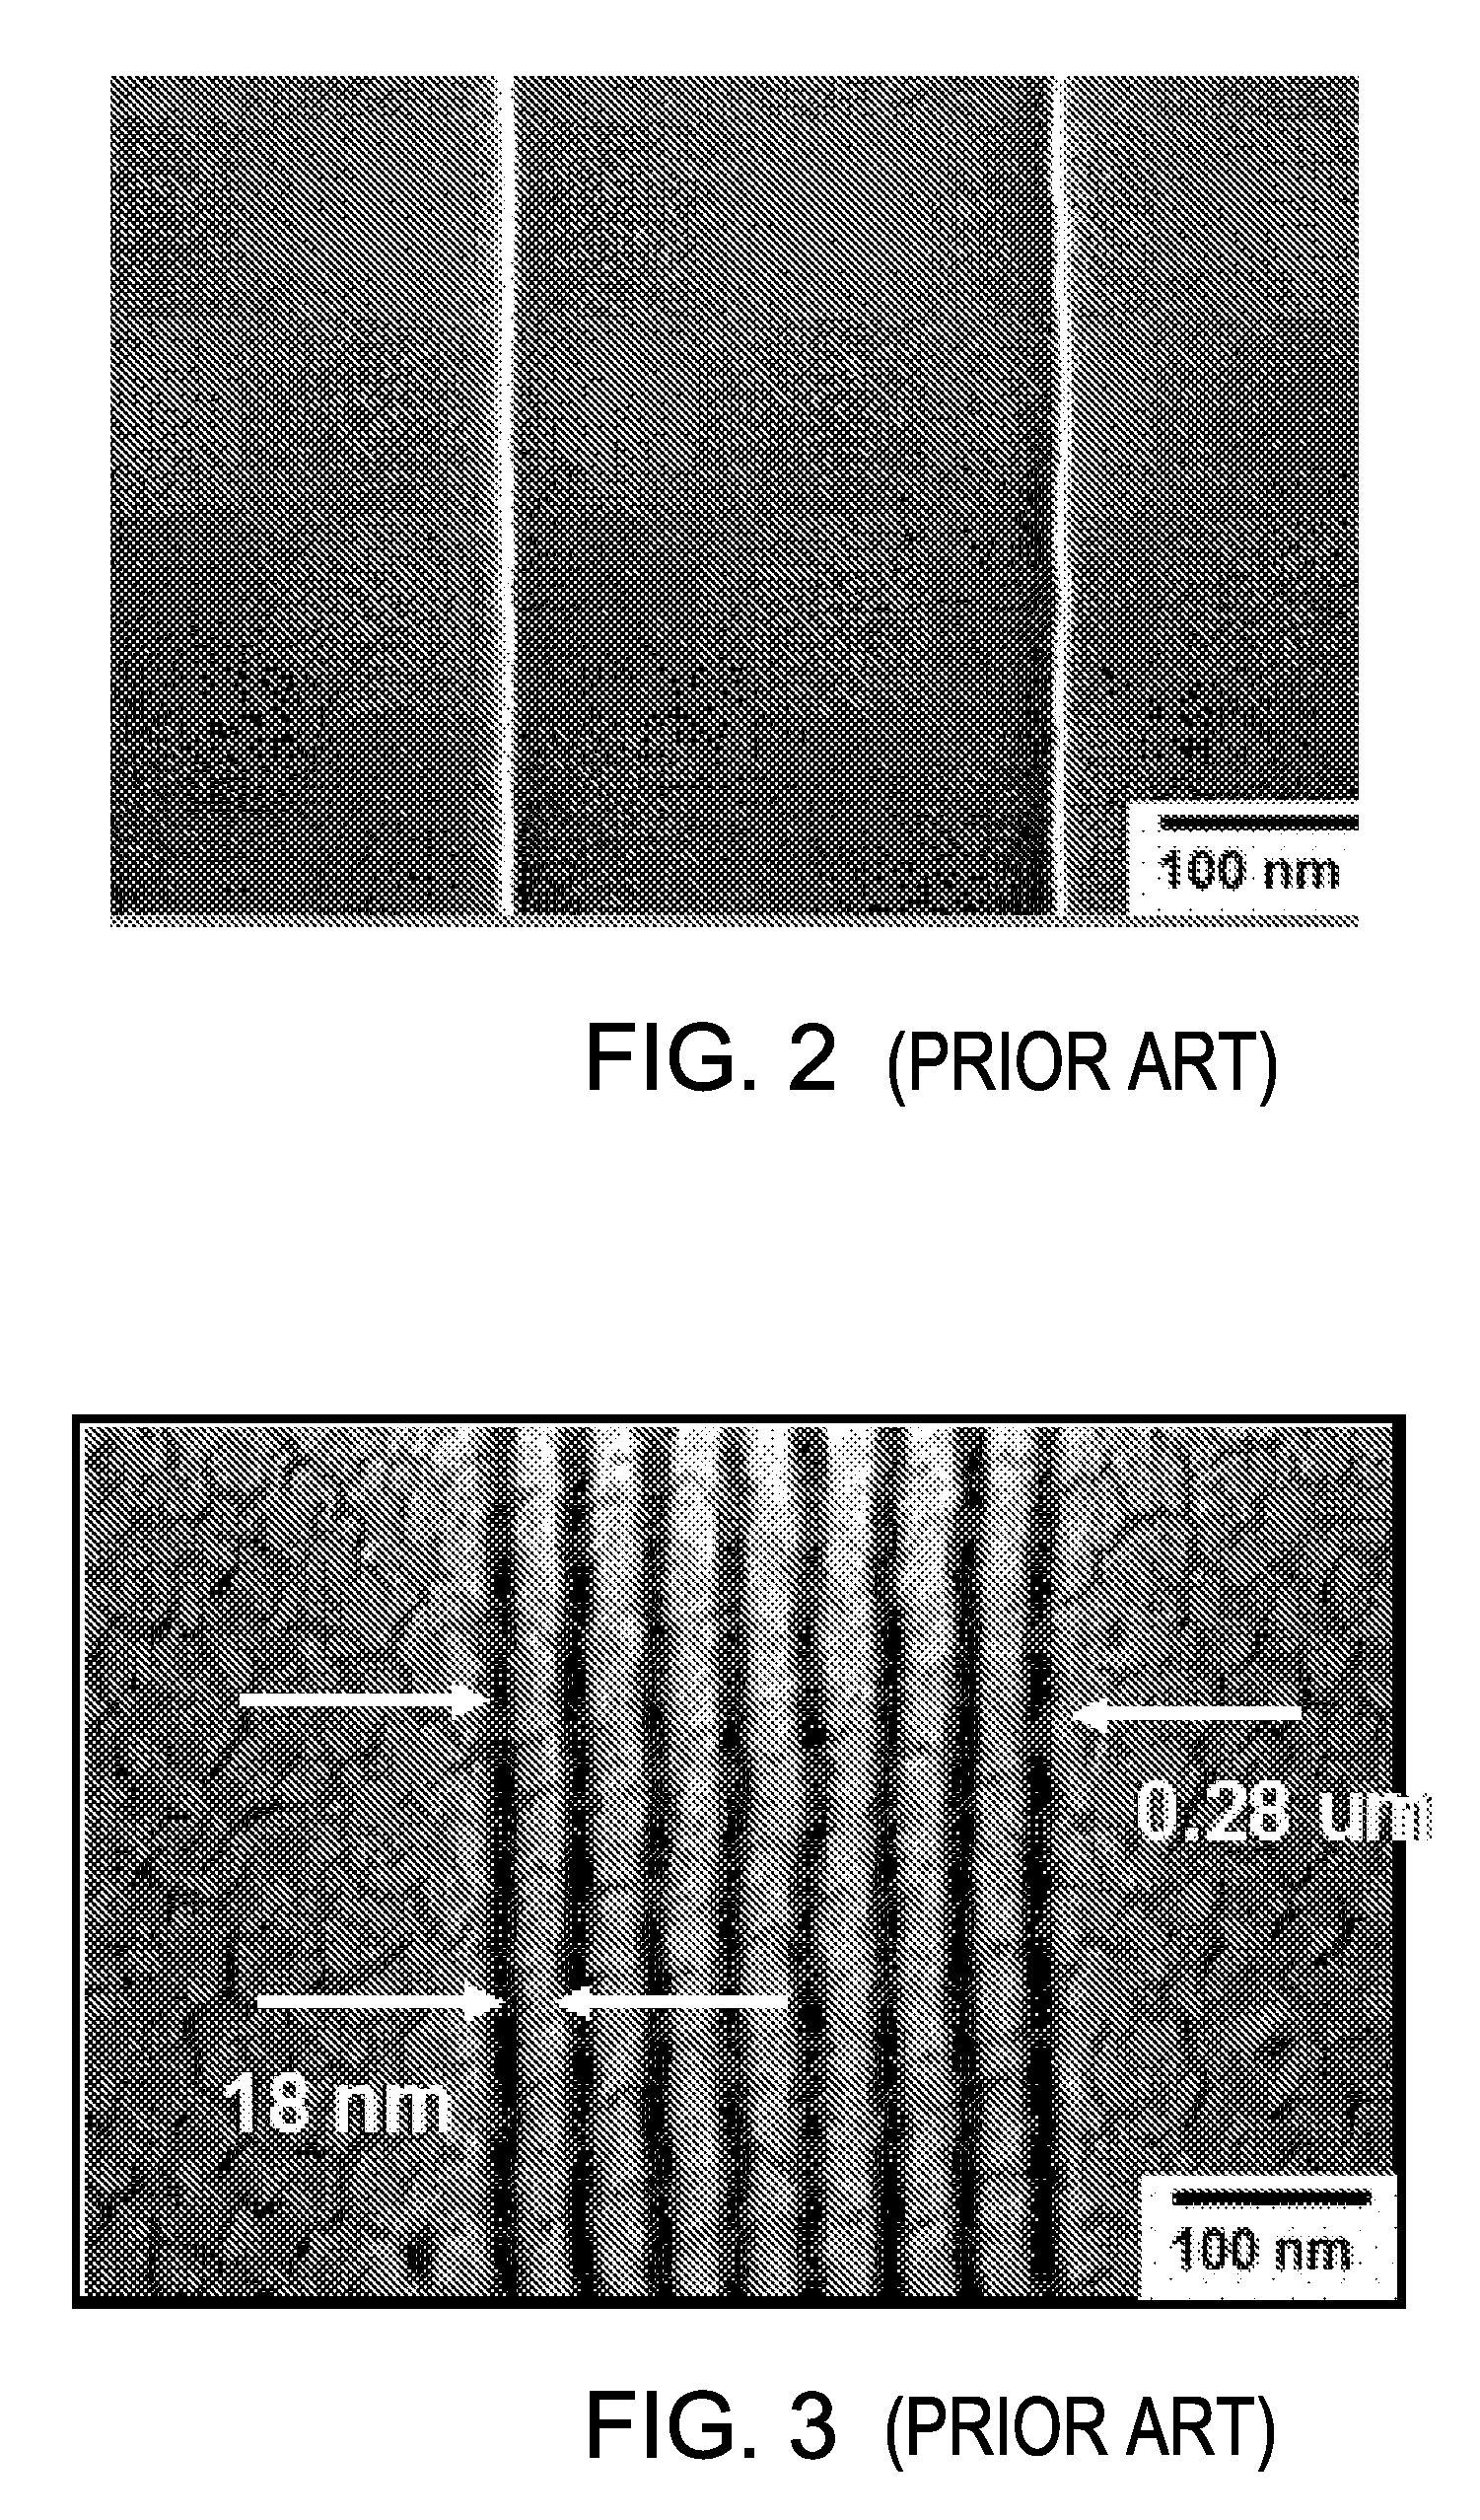 Sub-lithographic faceting for mosfet performance enhancement